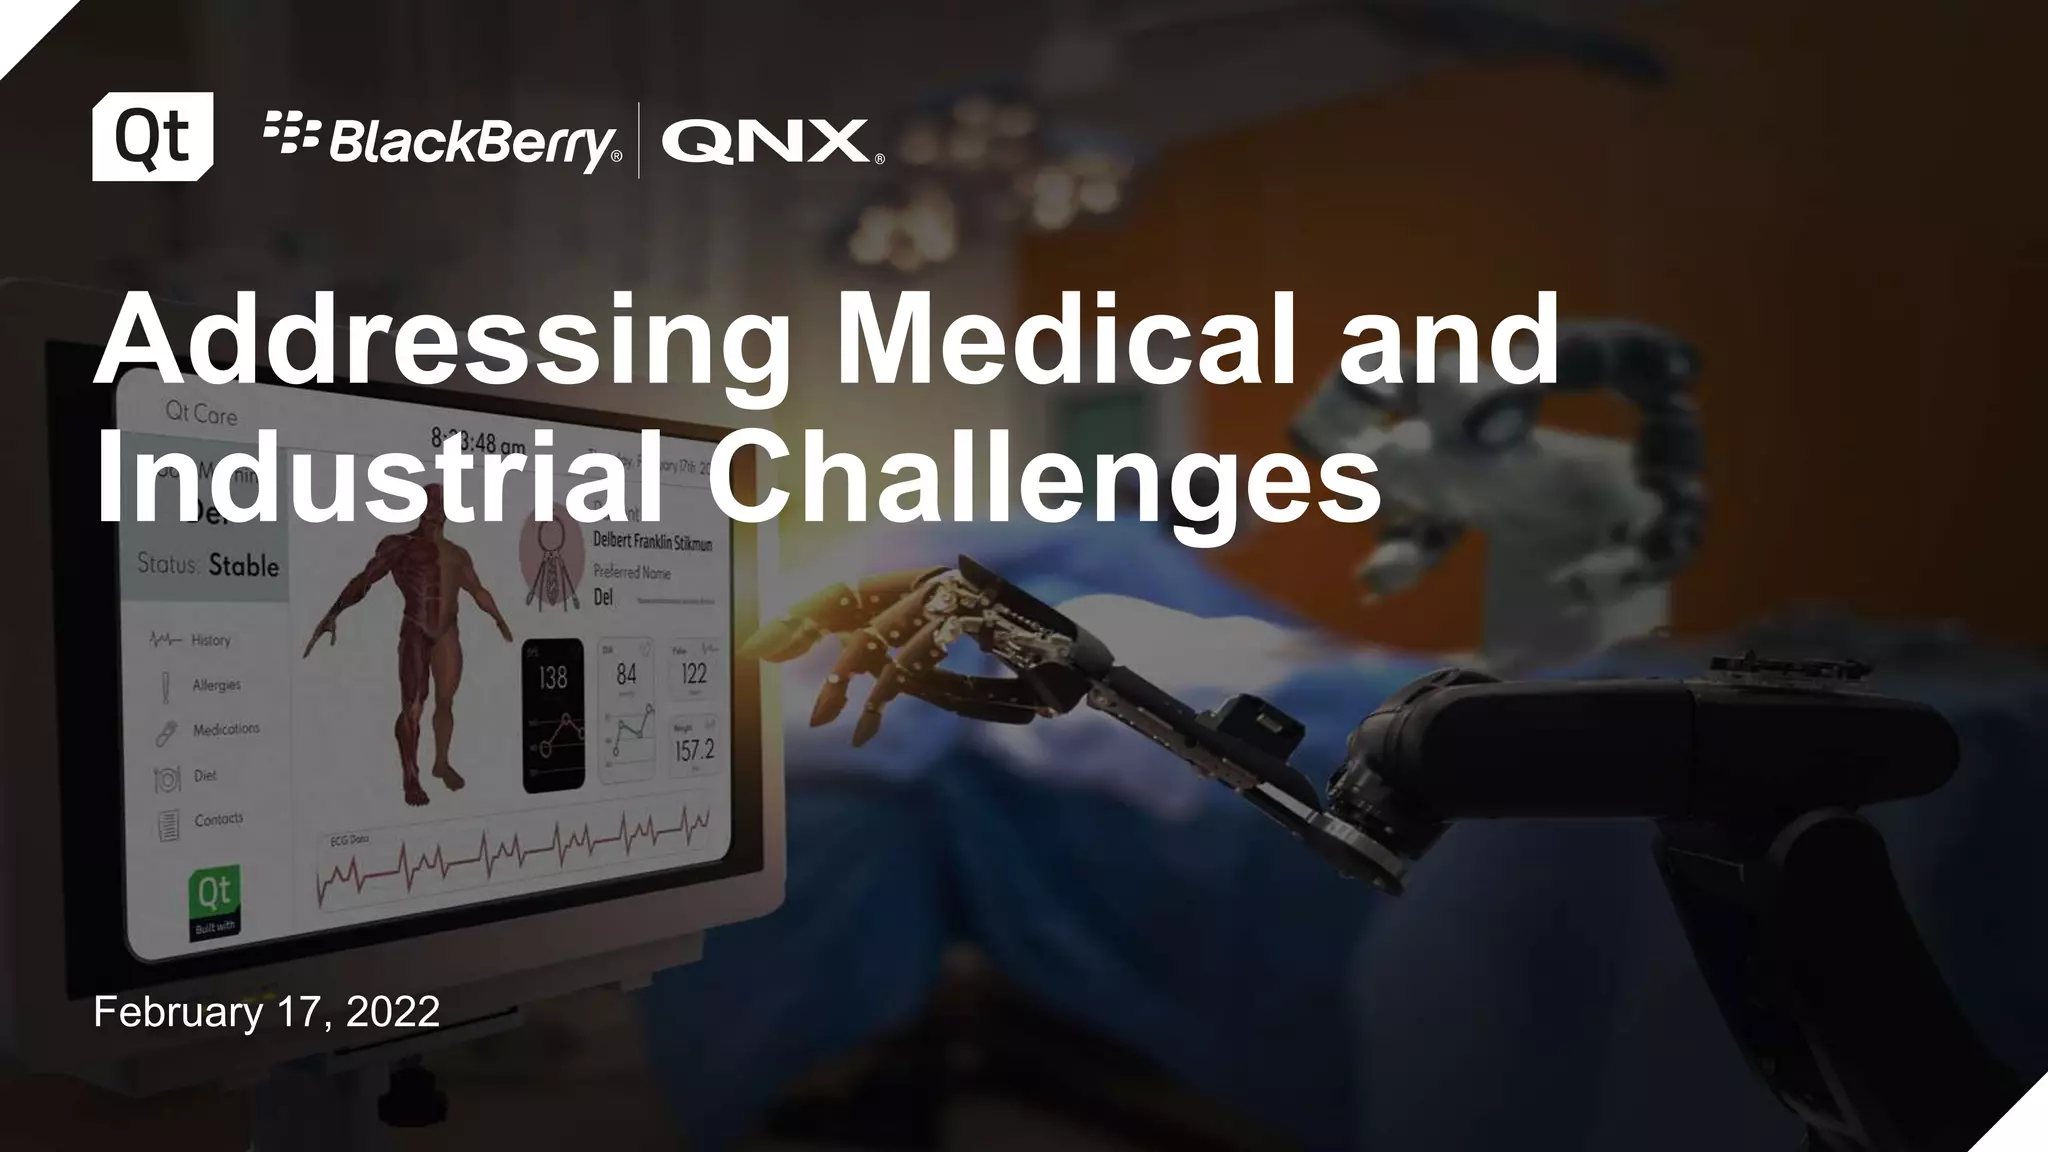 Learn how to addressing medical and industrial challenges with BlackBerry QNX and Qt